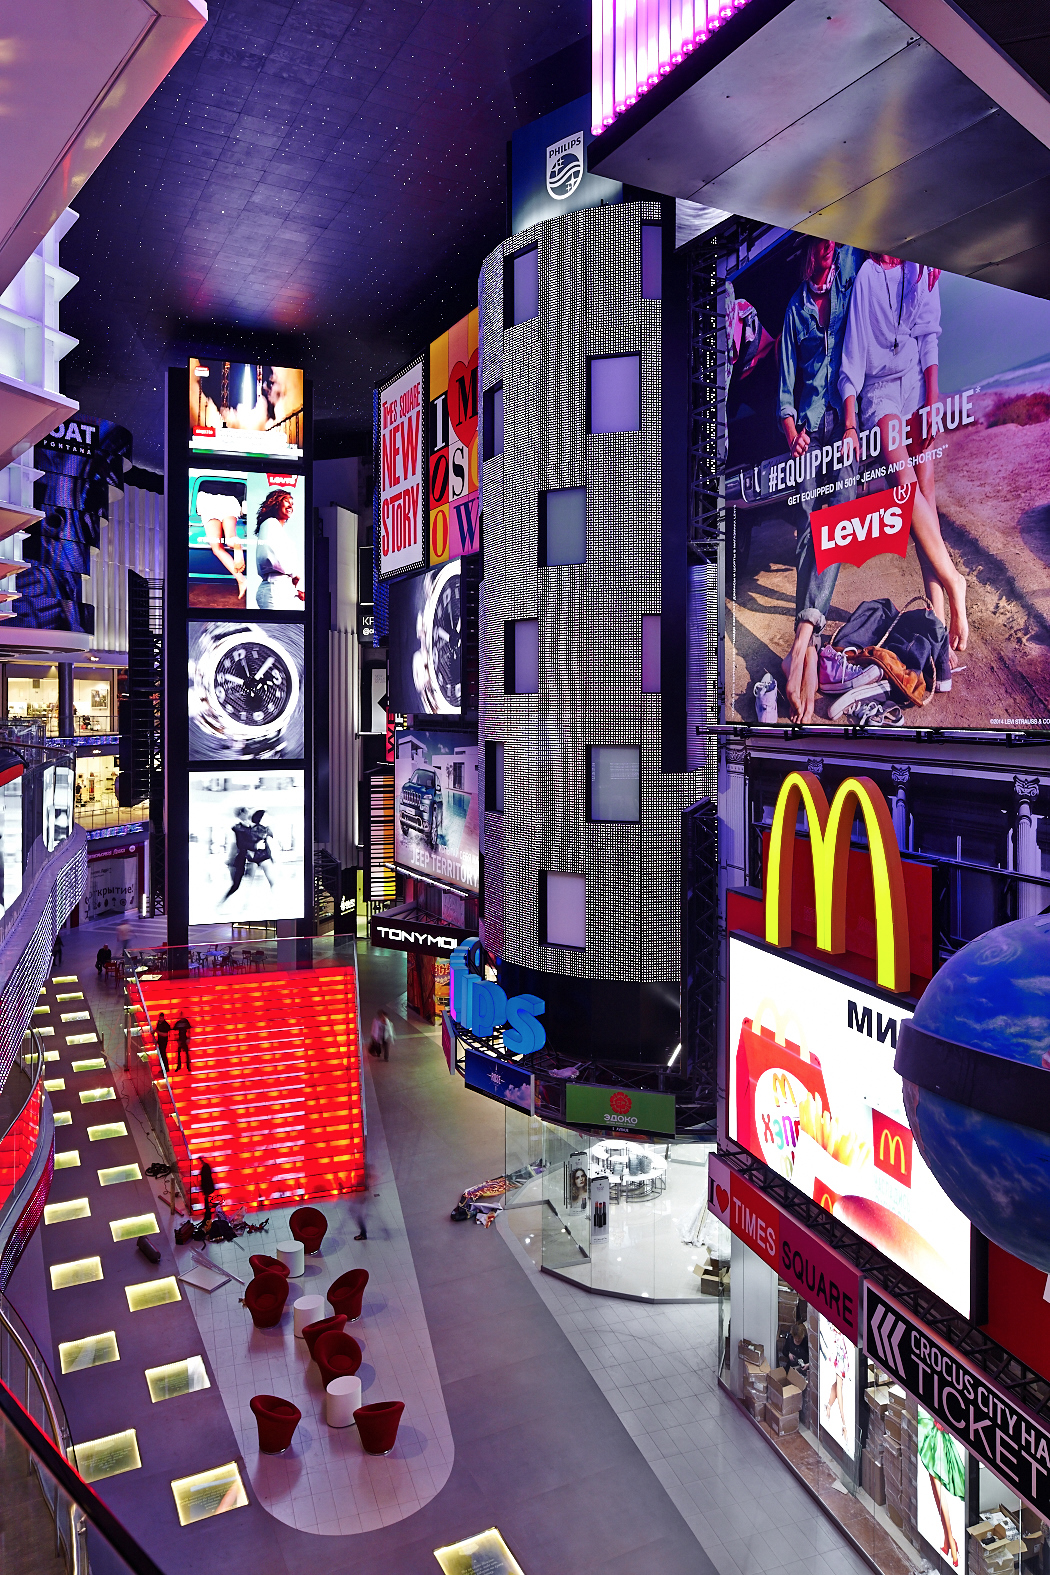 Moscow’s Replica Of Times Square Looks Startlingly Realistic